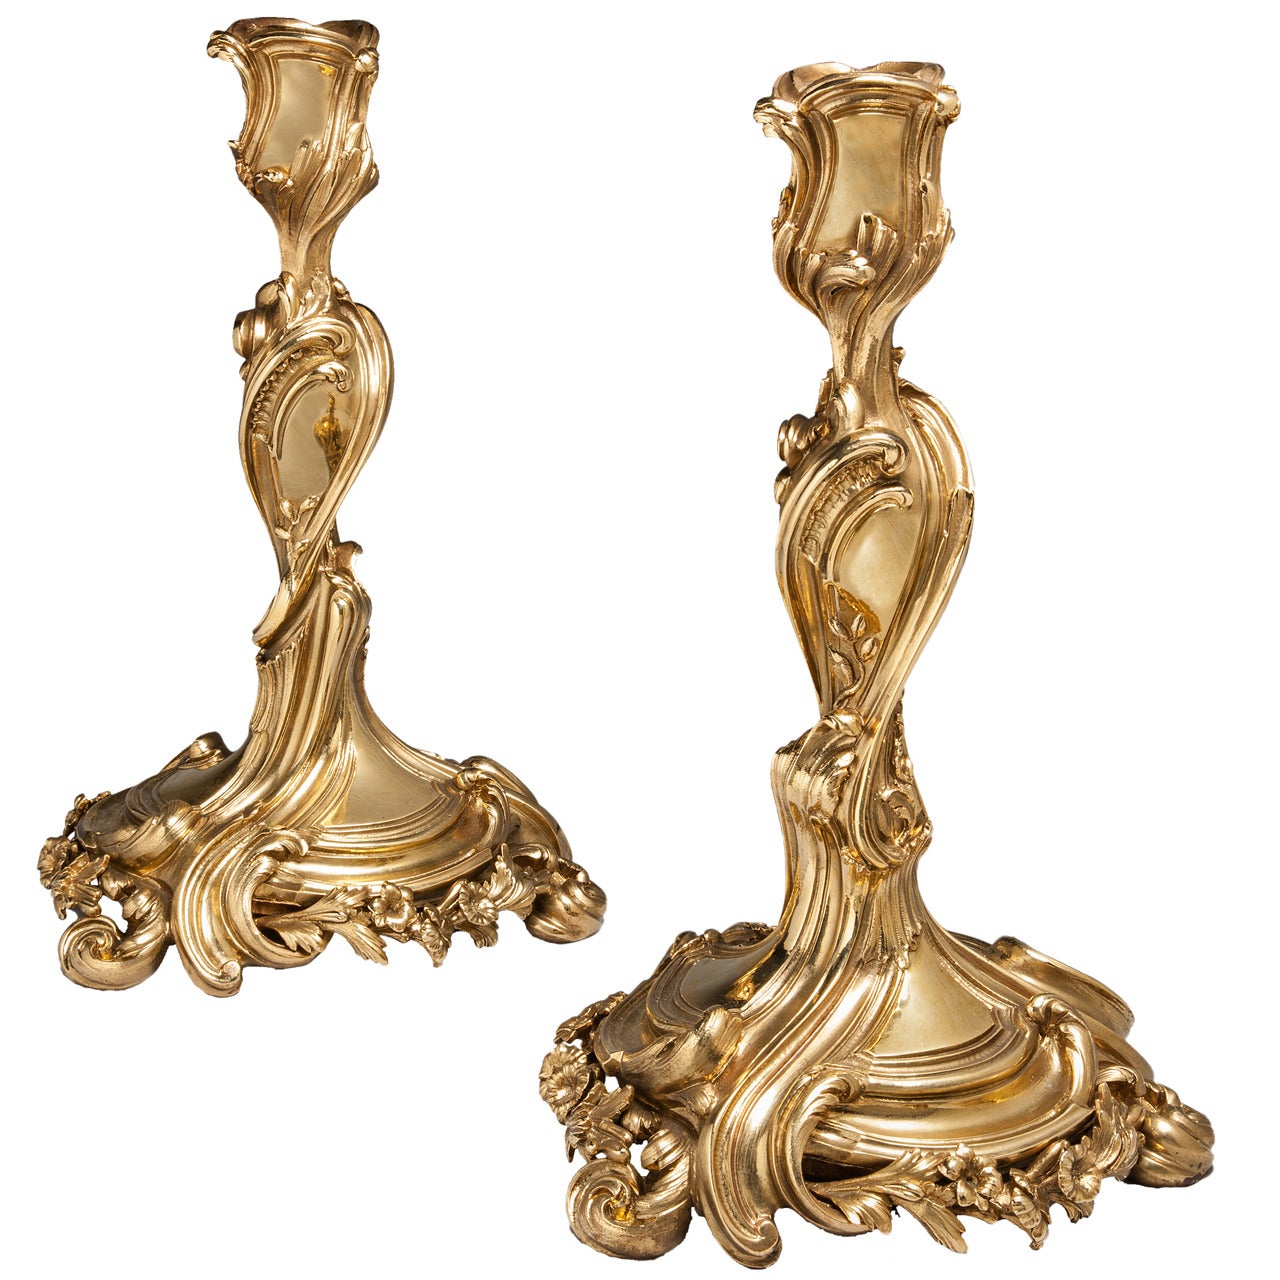 Pair of Rococo Revival Candlesticks For Sale